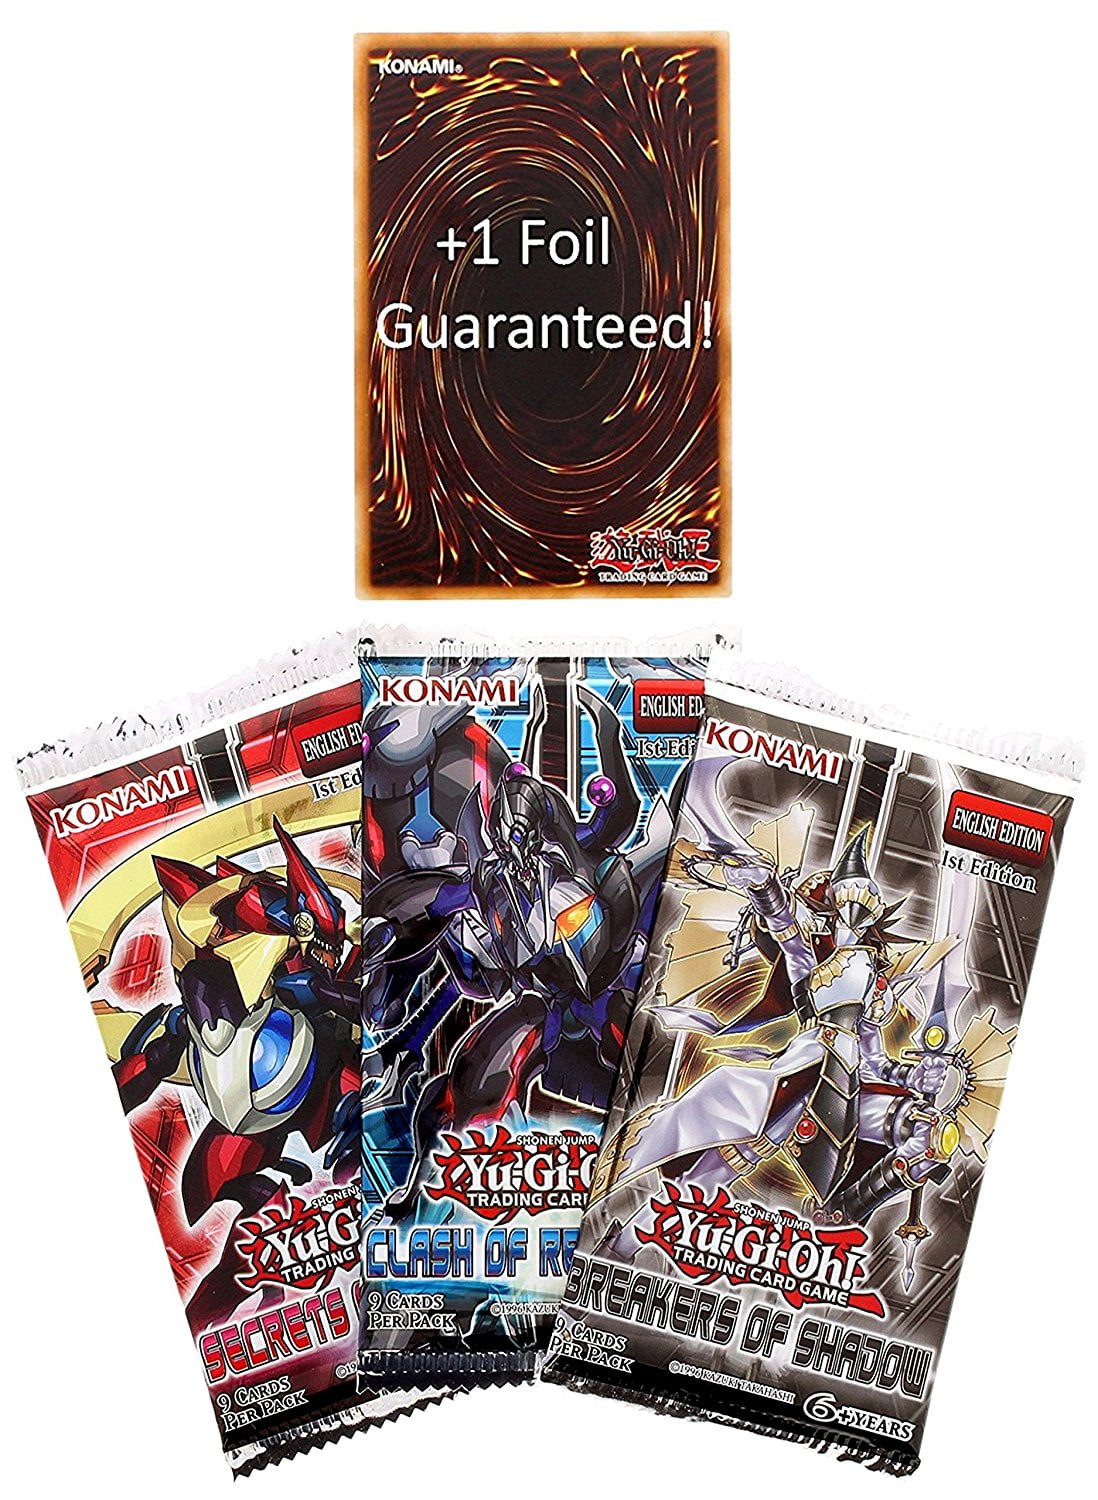 Blister Pack Containing 3 Booster Packs And 1 Hologram 1x Yu-Gi-Oh TCG 